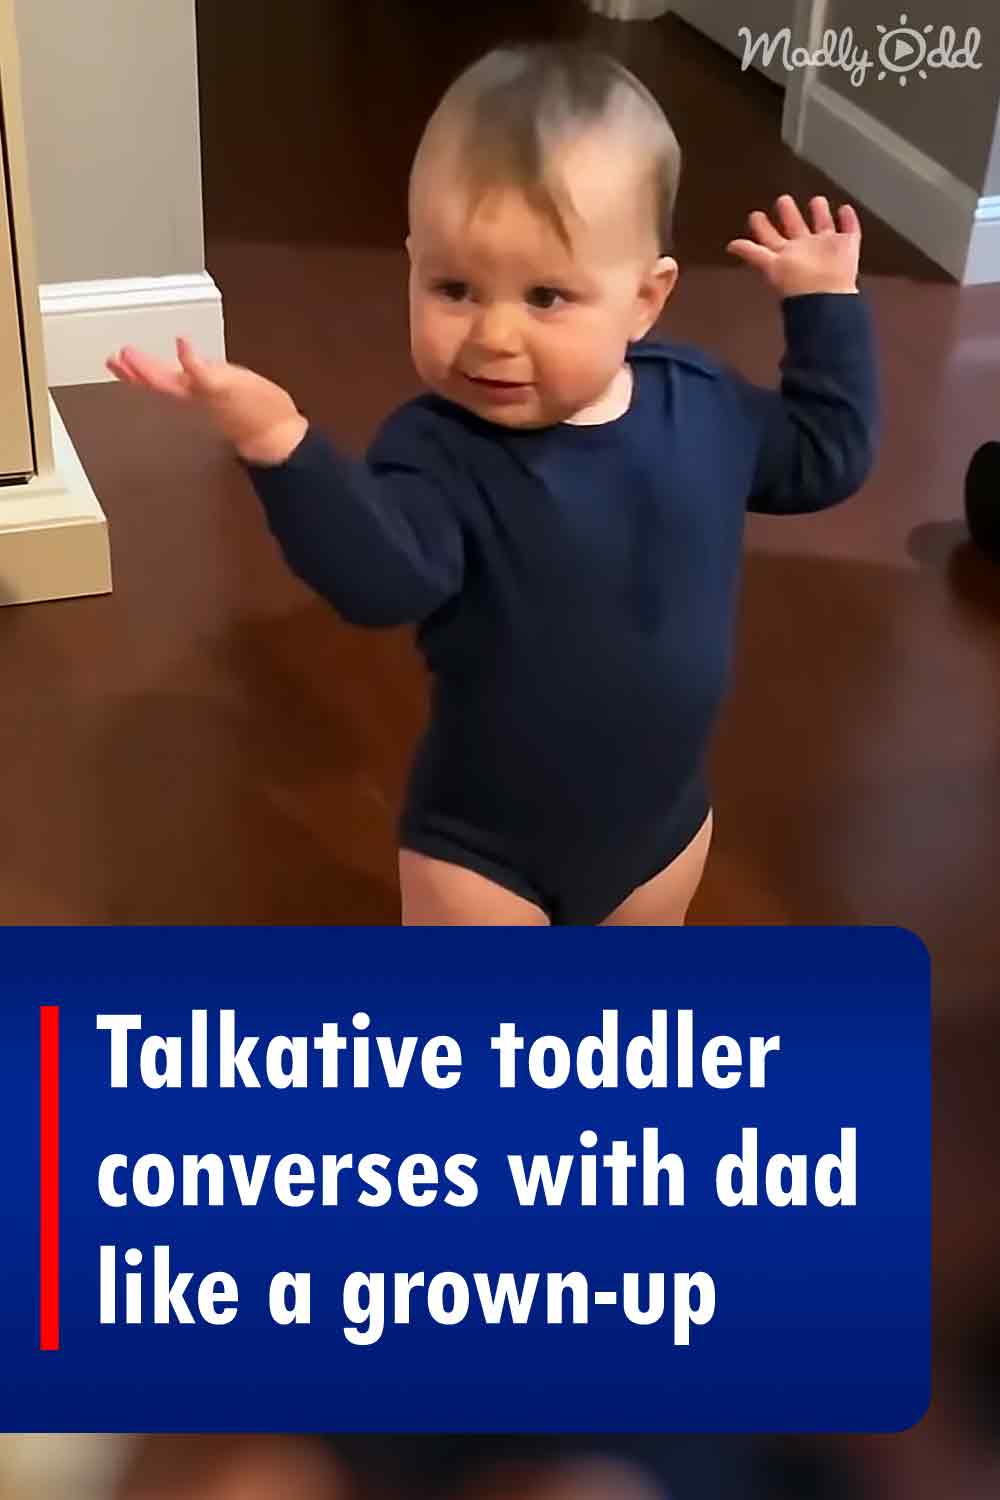 Talkative toddler converses with dad like a grown-up